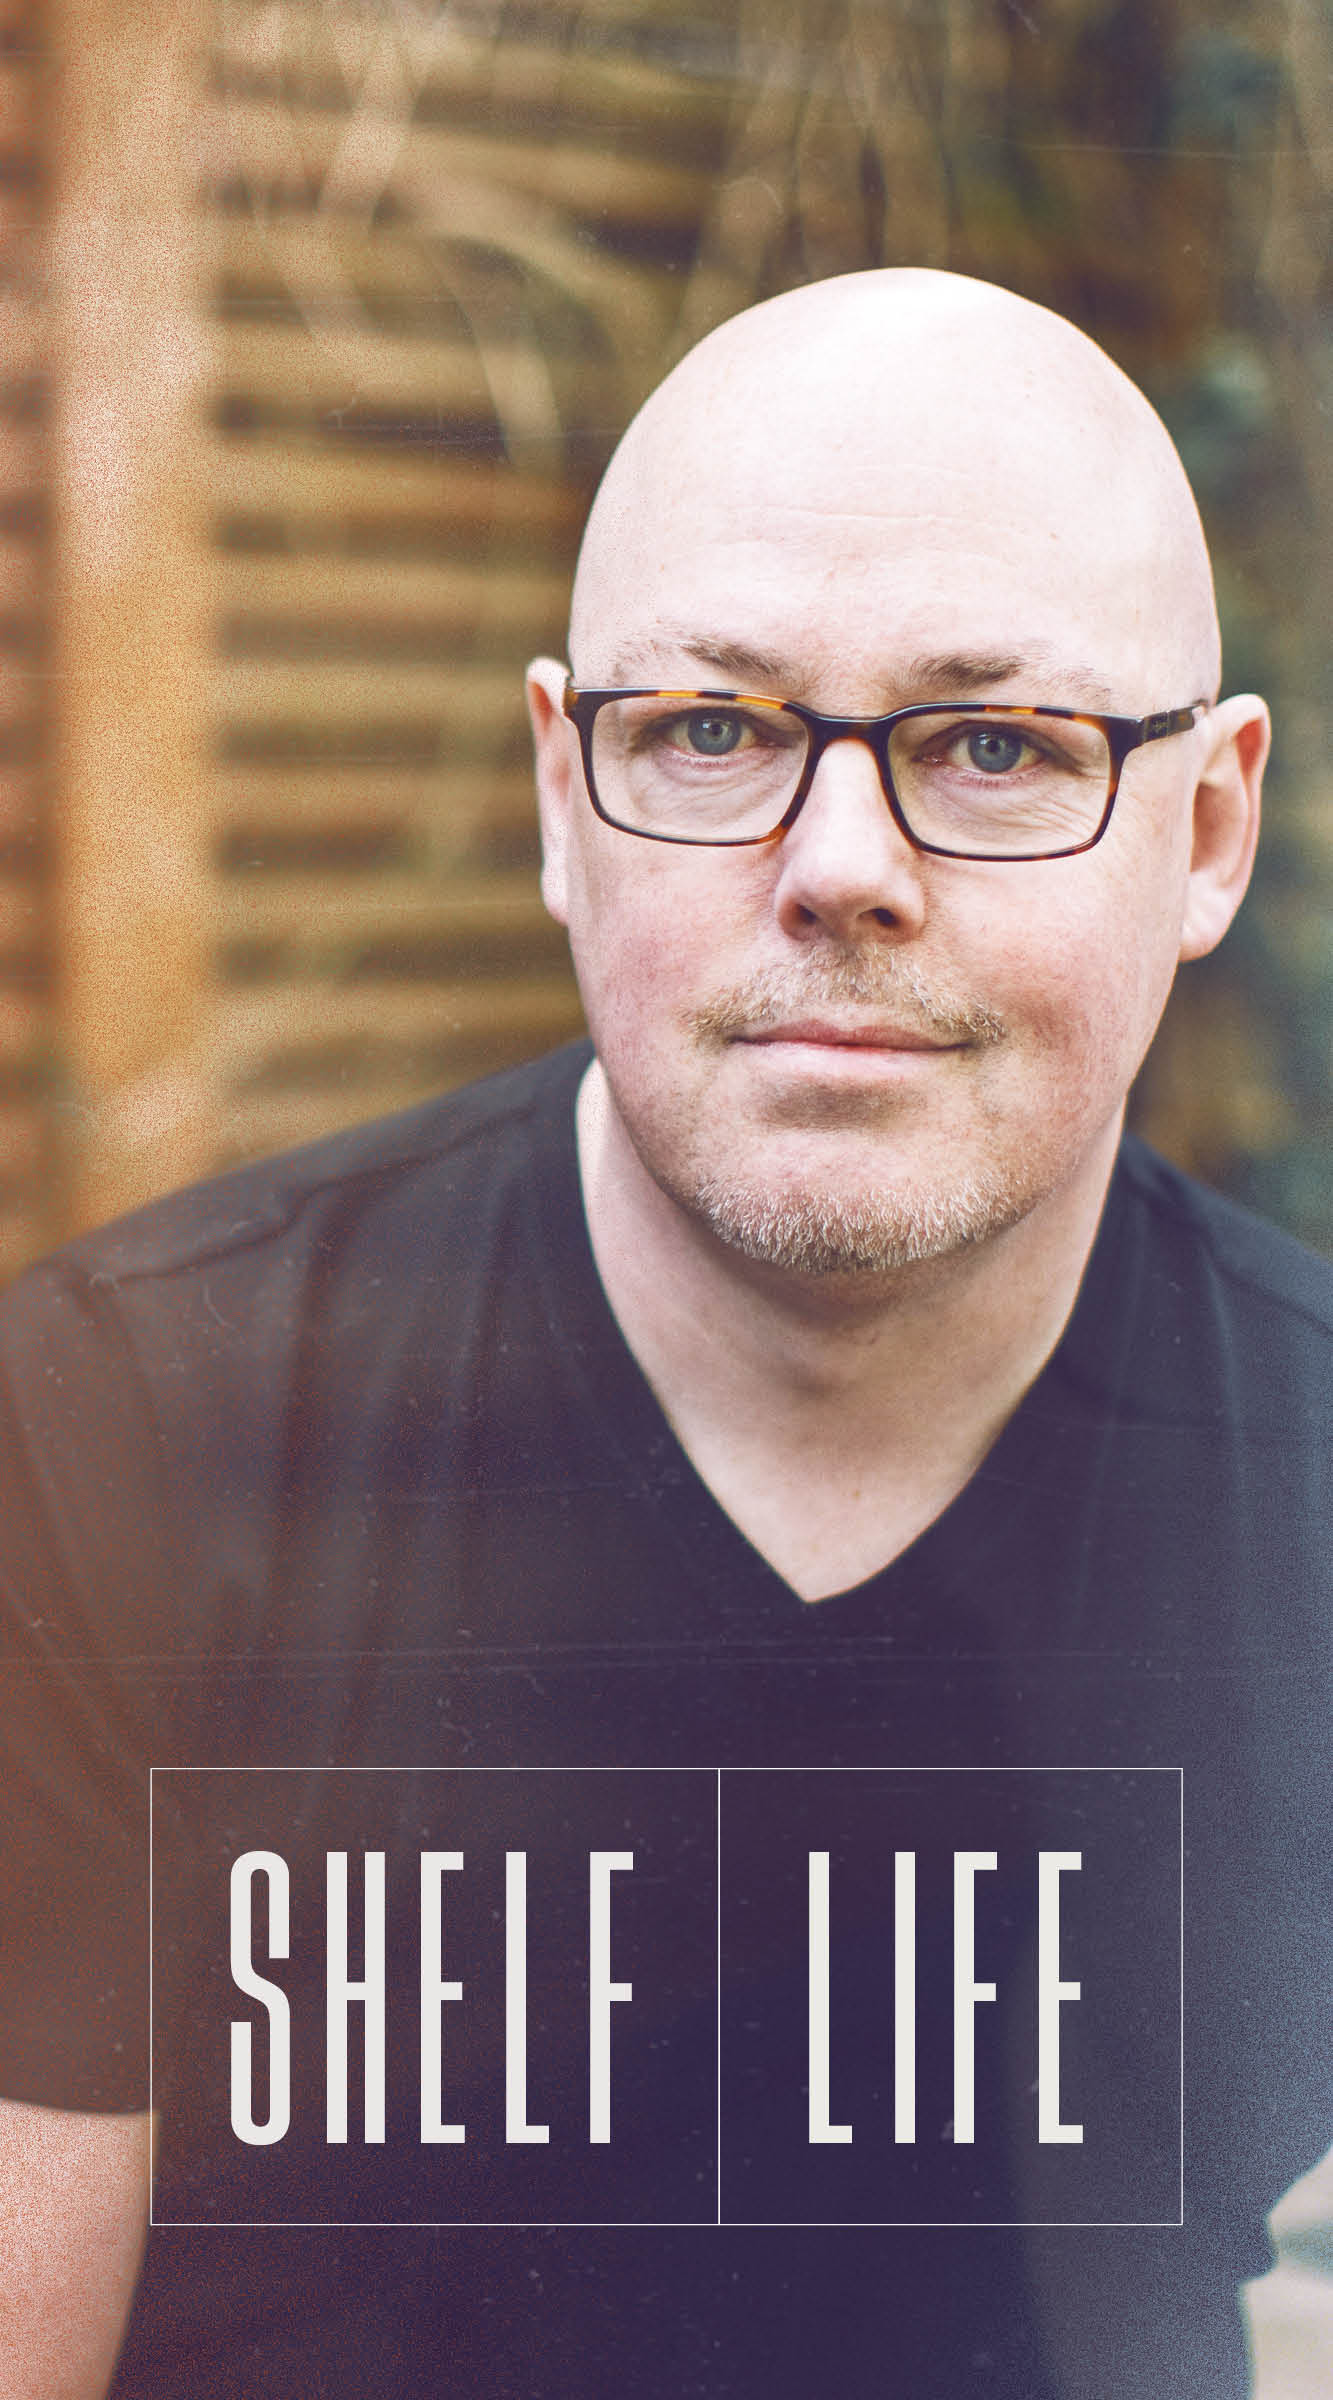 A photo of author John Boyne against a fence, with the words Shelf Life overlaid in white